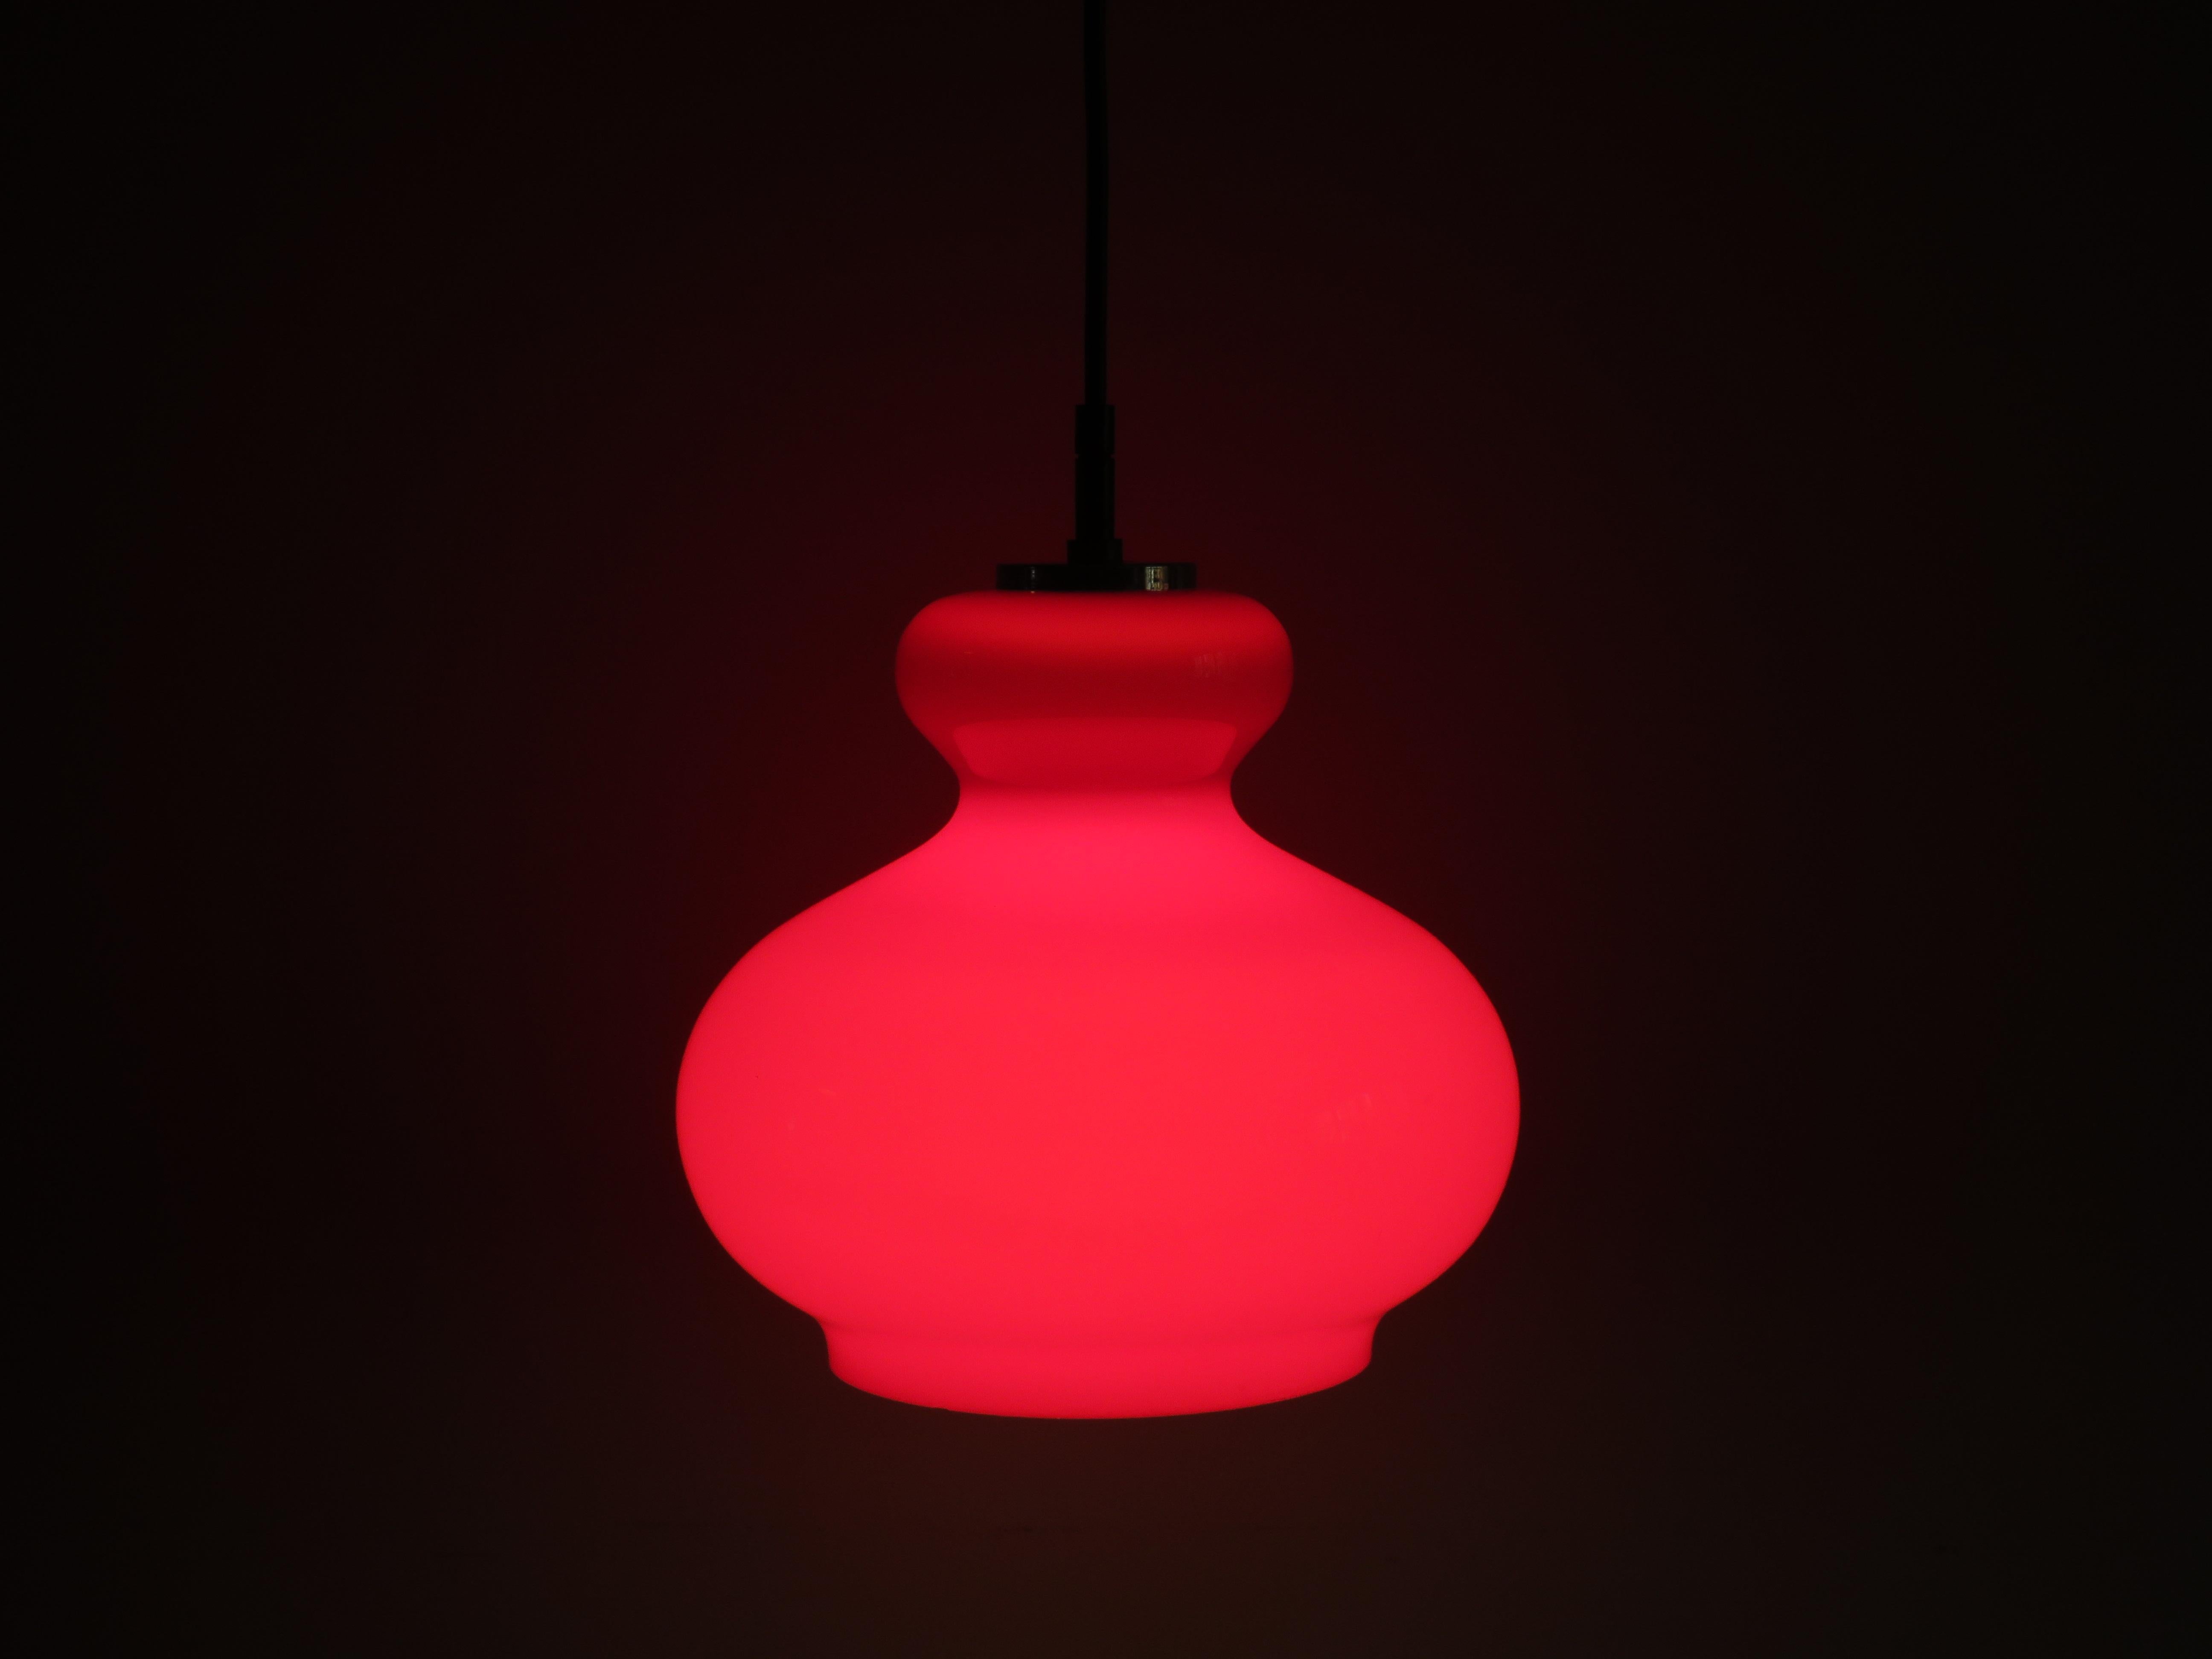 Bell-shaped, red hanging lamp produced by Peill & Putzler in Germany in the period 1960-1970
The lamp has an E 27 fitting, suitable for a lamp up to a maximum of 100 Watt.
The lamp has good wiring and is ready to use. It is possible to install the